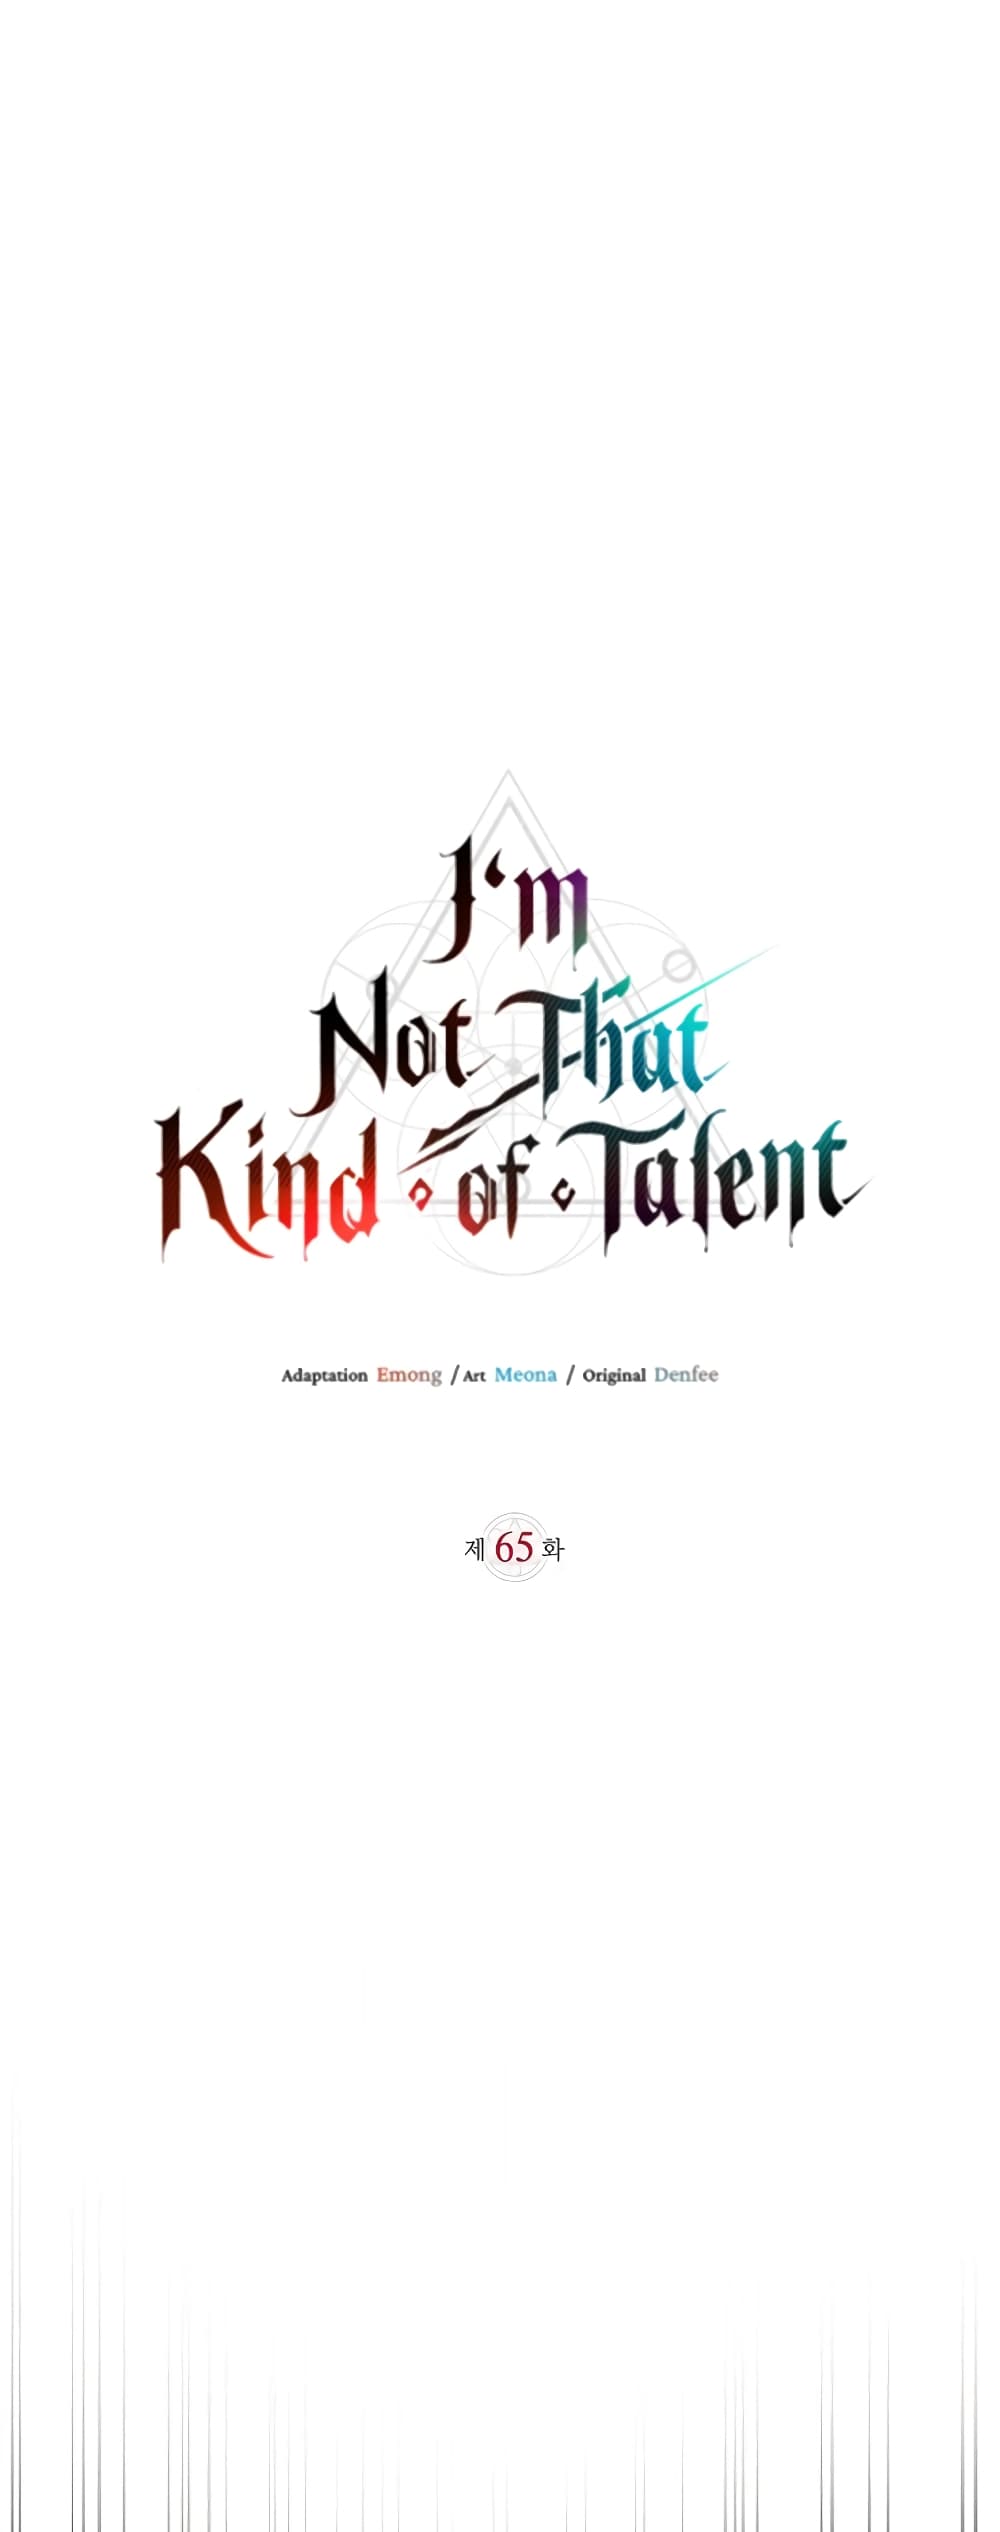 I’m Not That Kind of Talent 65-65